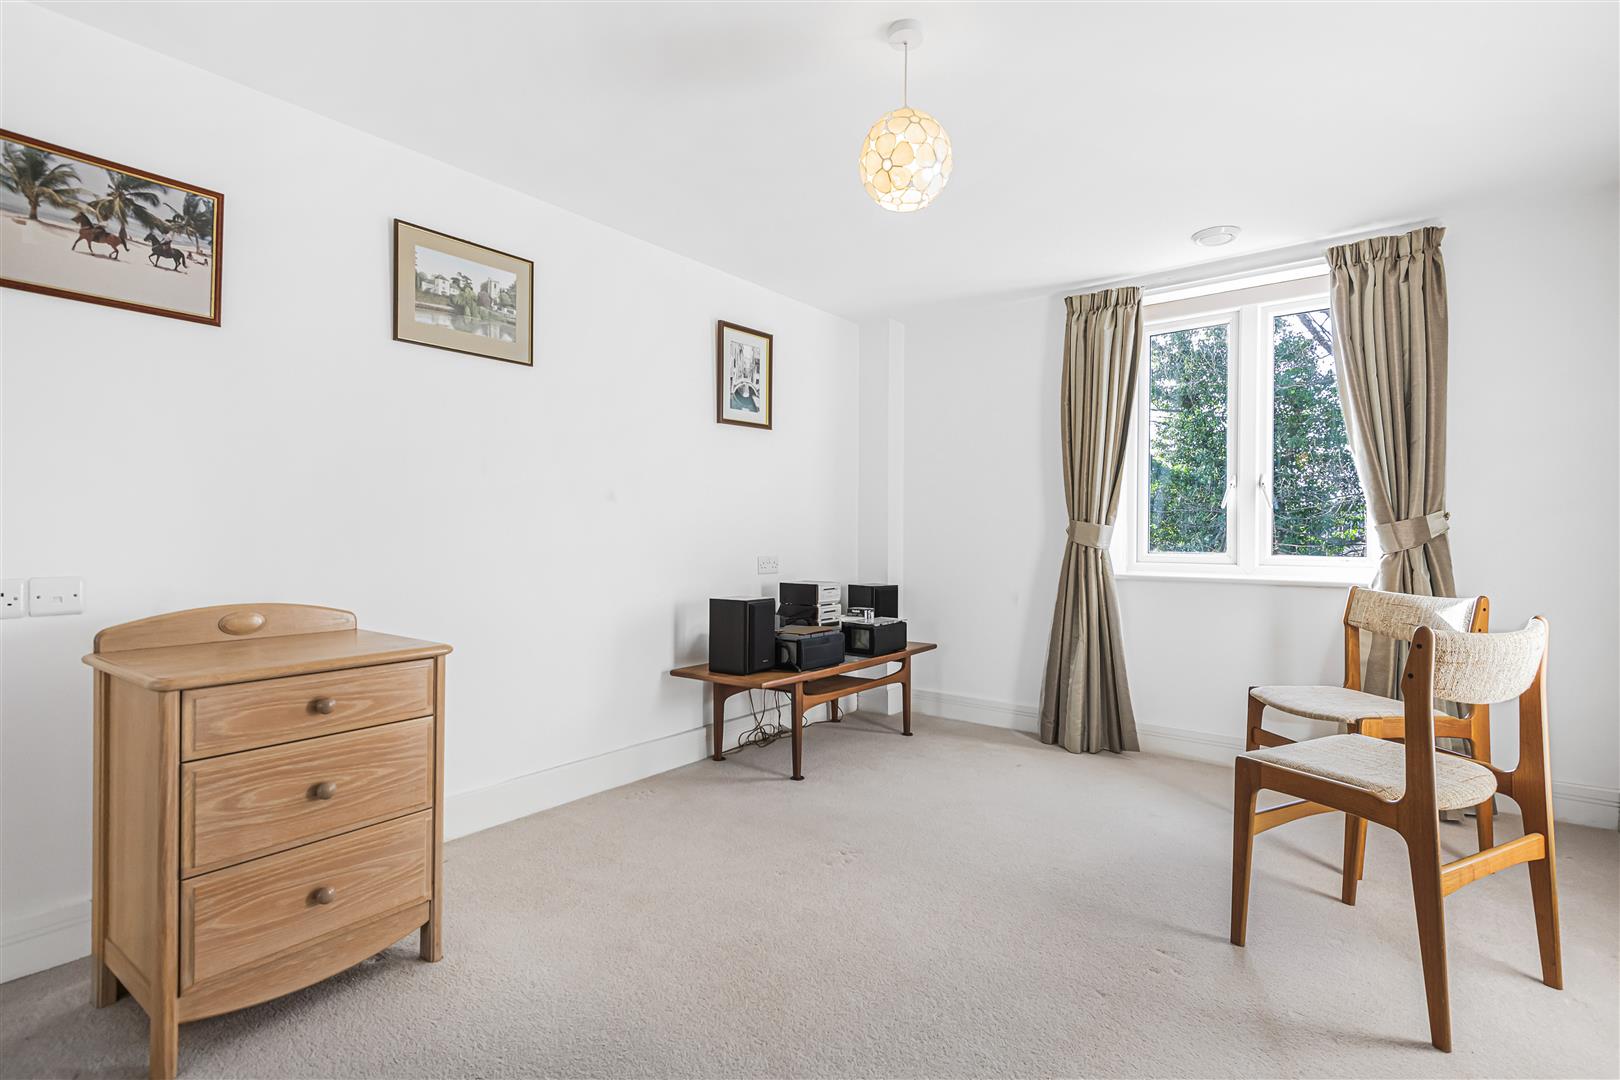 Crayshaw Court Abbotsmead Place Apartment for sale in Reading